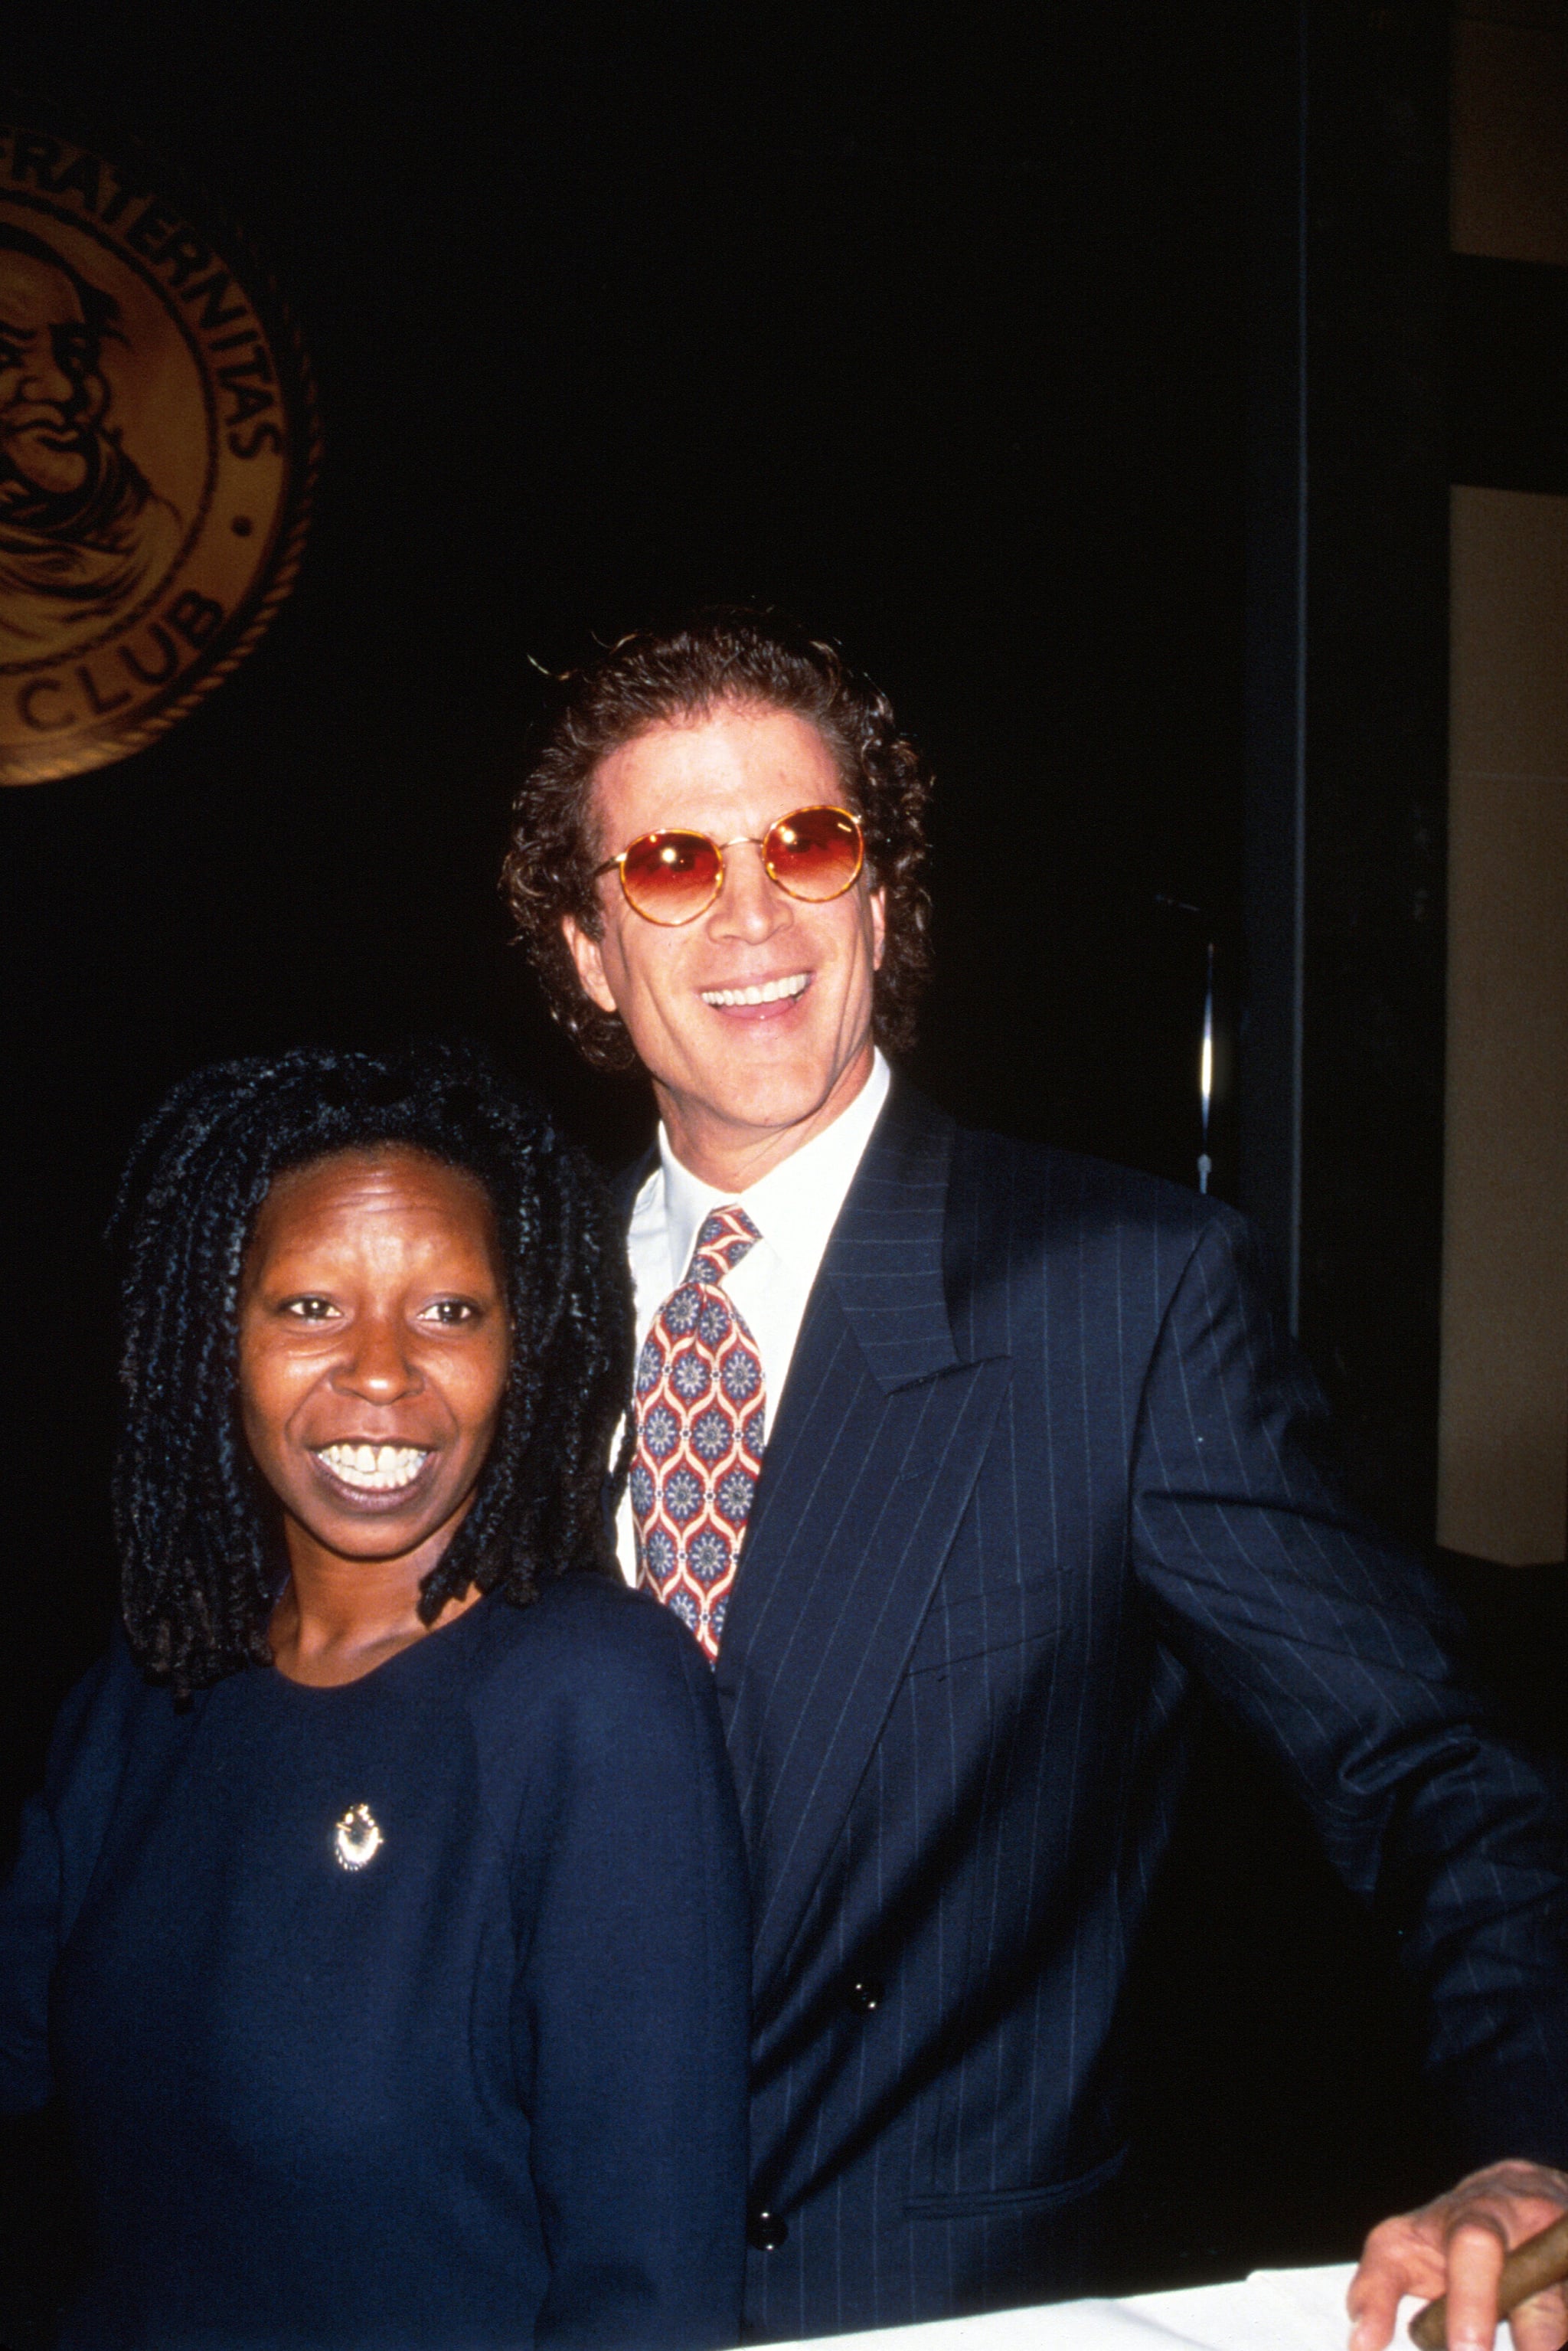 Whoopi Goldberg and Ted Danson | These Iconic '90s Couples Will Have You Whispering, "Winona Forever" | POPSUGAR Celebrity Photo 28